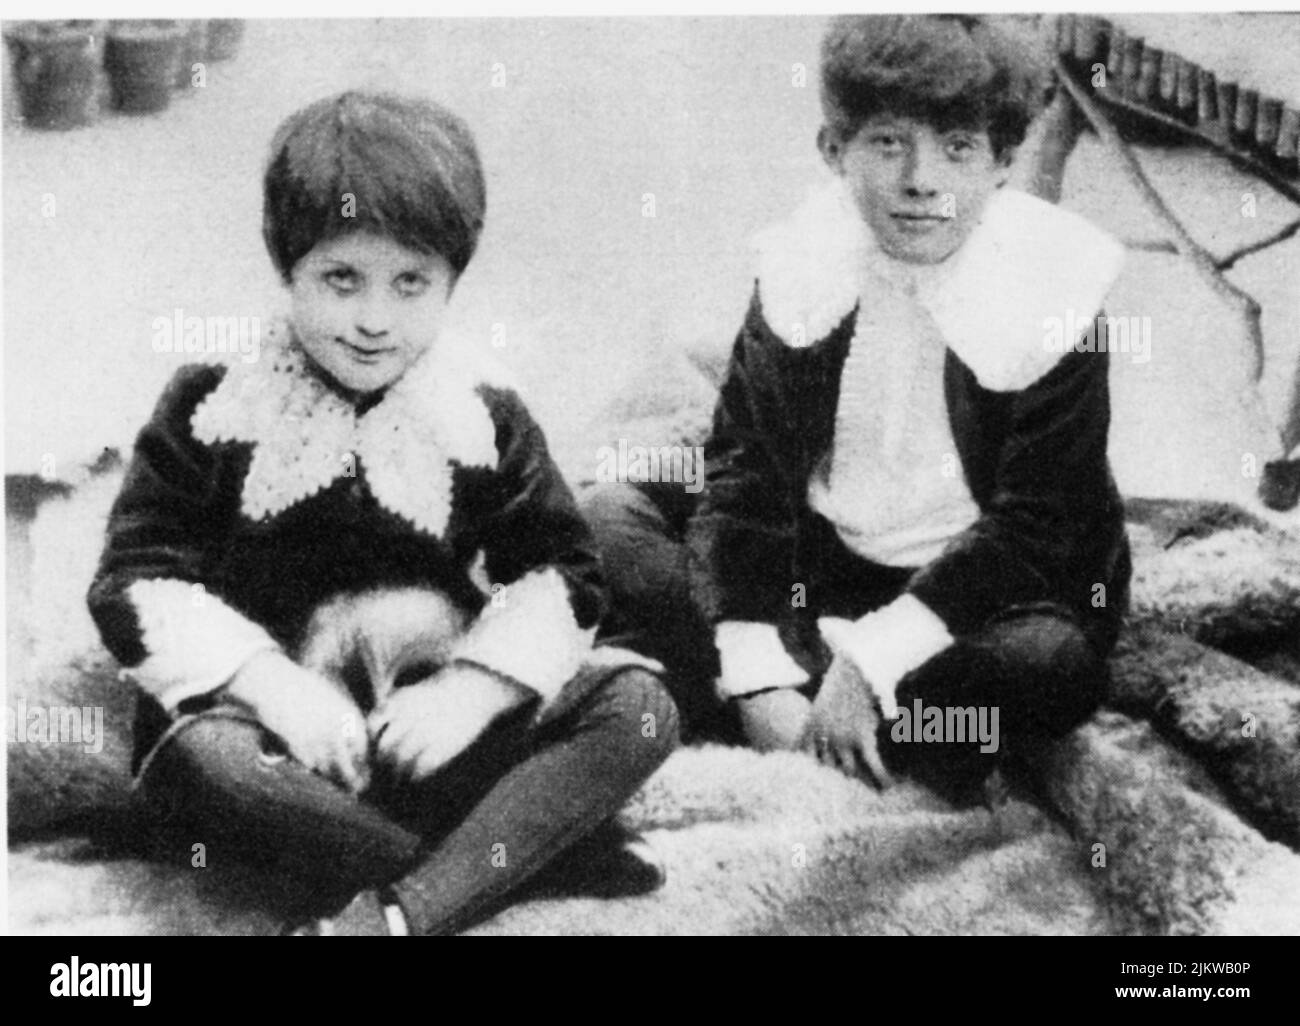 1891 ca. : CYRIL ( aged six )  and  VYVYAN  ( aged five ) WILDE , the two sons of  the celebrated irish writer and dramatist OSCAR WILDE ( 1854 - 1900 )  - SCRITTORE - LETTERATURA - LITERATURE - POET - POETA - POESIA - DRAMMATURGO - playwriter - play-writer - TEATRO - THEATER - THEATRE  - POETRY   - GAY - HOMOSEXUALITY - HOMOSEXUAL - omosessuale - omosessualità   - bambino - bambini - child - children - fratelli - brothers   ----  Archivio GBB Stock Photo